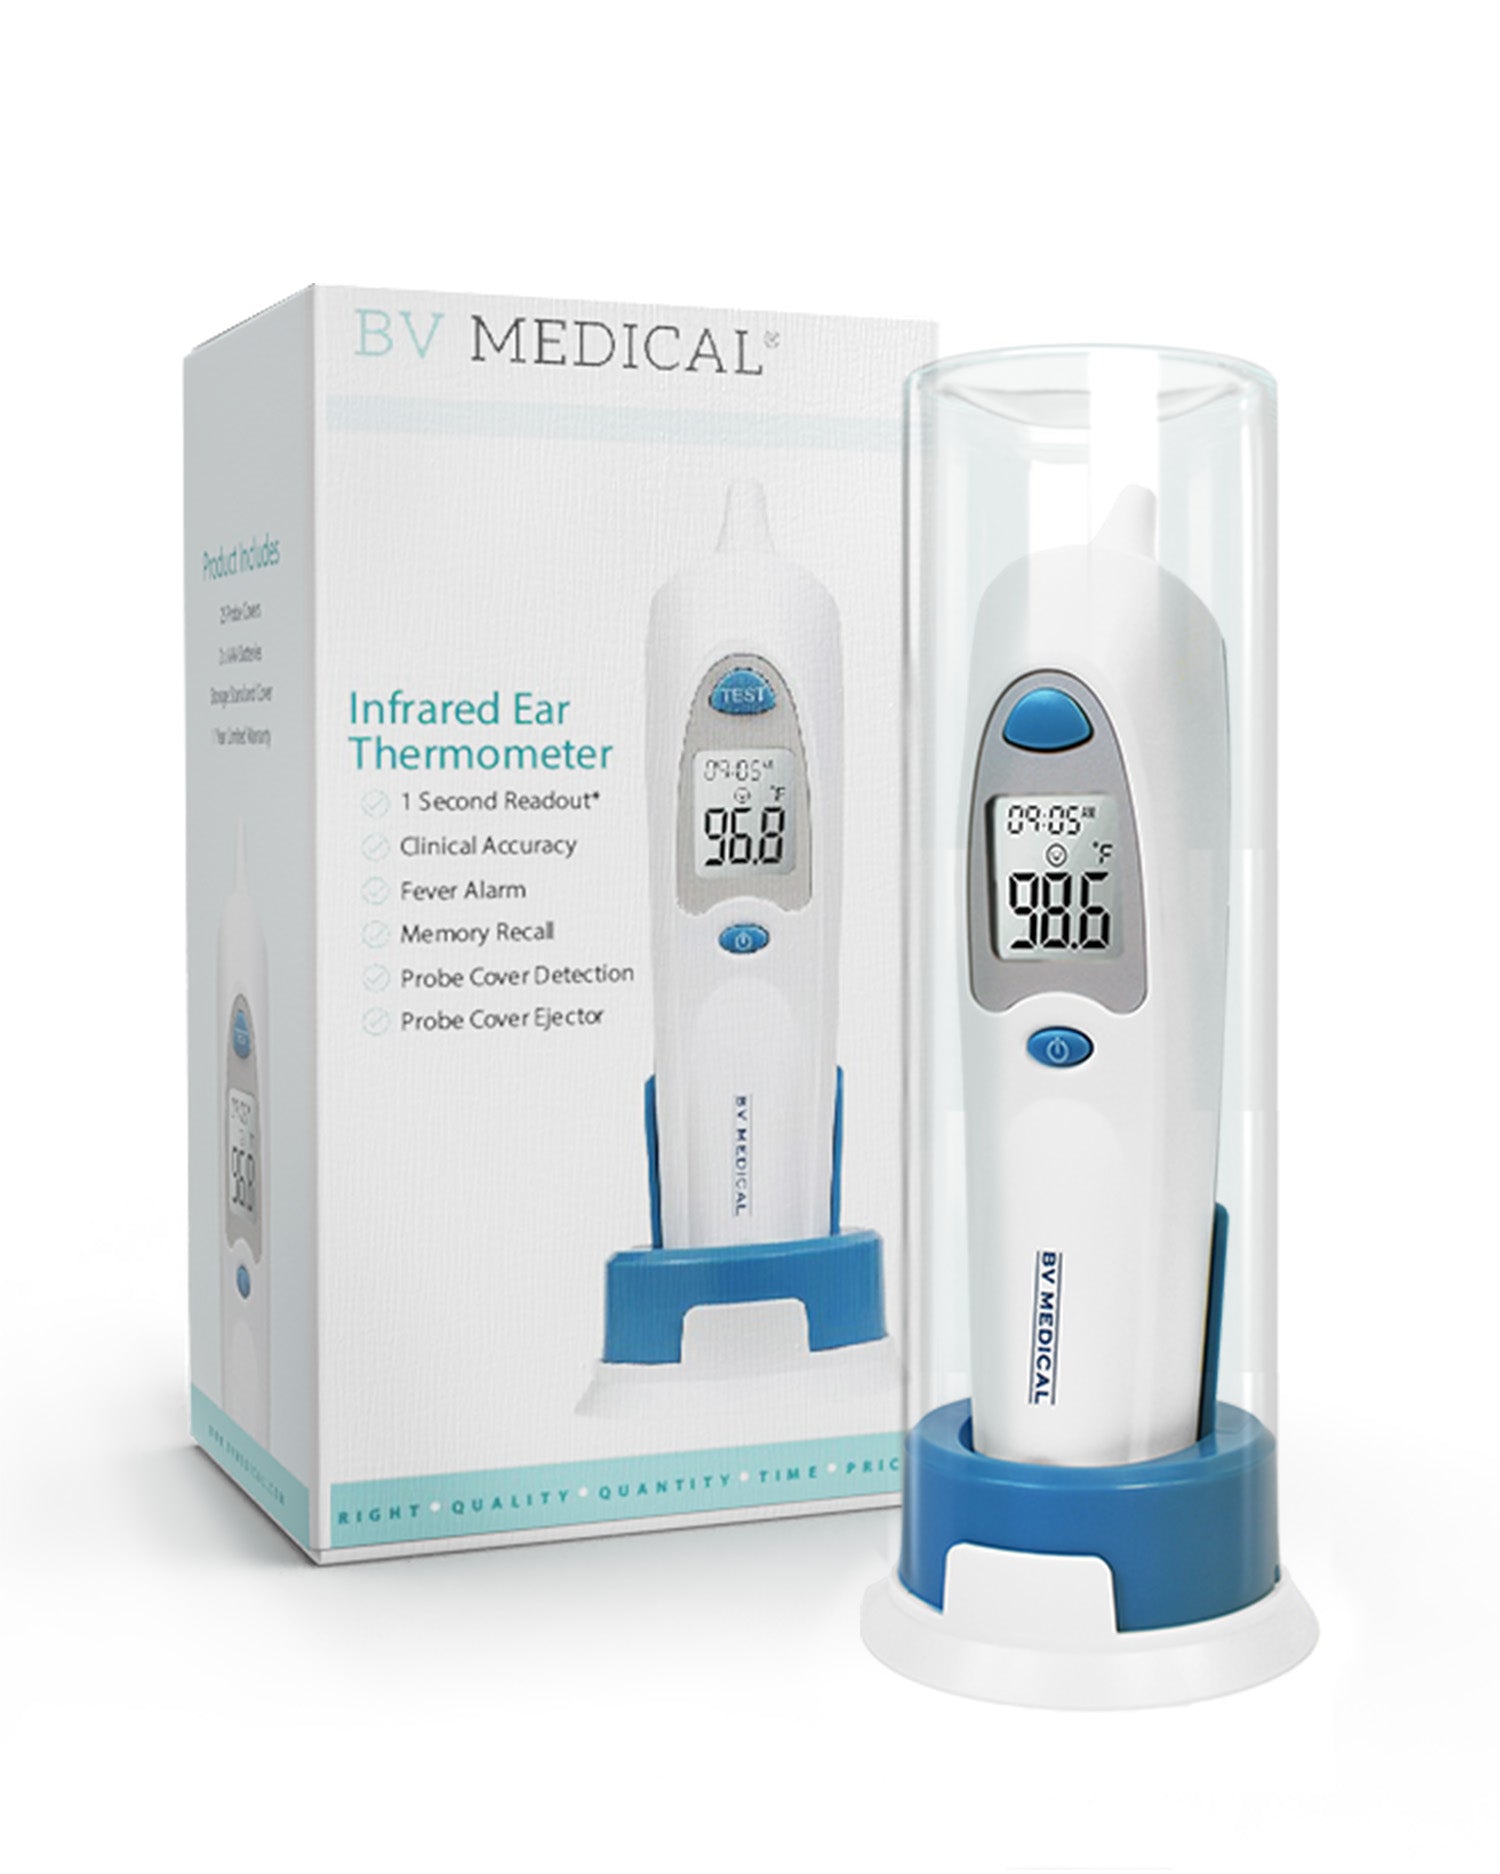 Product Includes: BV Medical Instant Ear Thermometer, 25 Probe Covers, Ear Thermometer Stand and Cover, 2 x AAA Batteries, and Instruction Manual